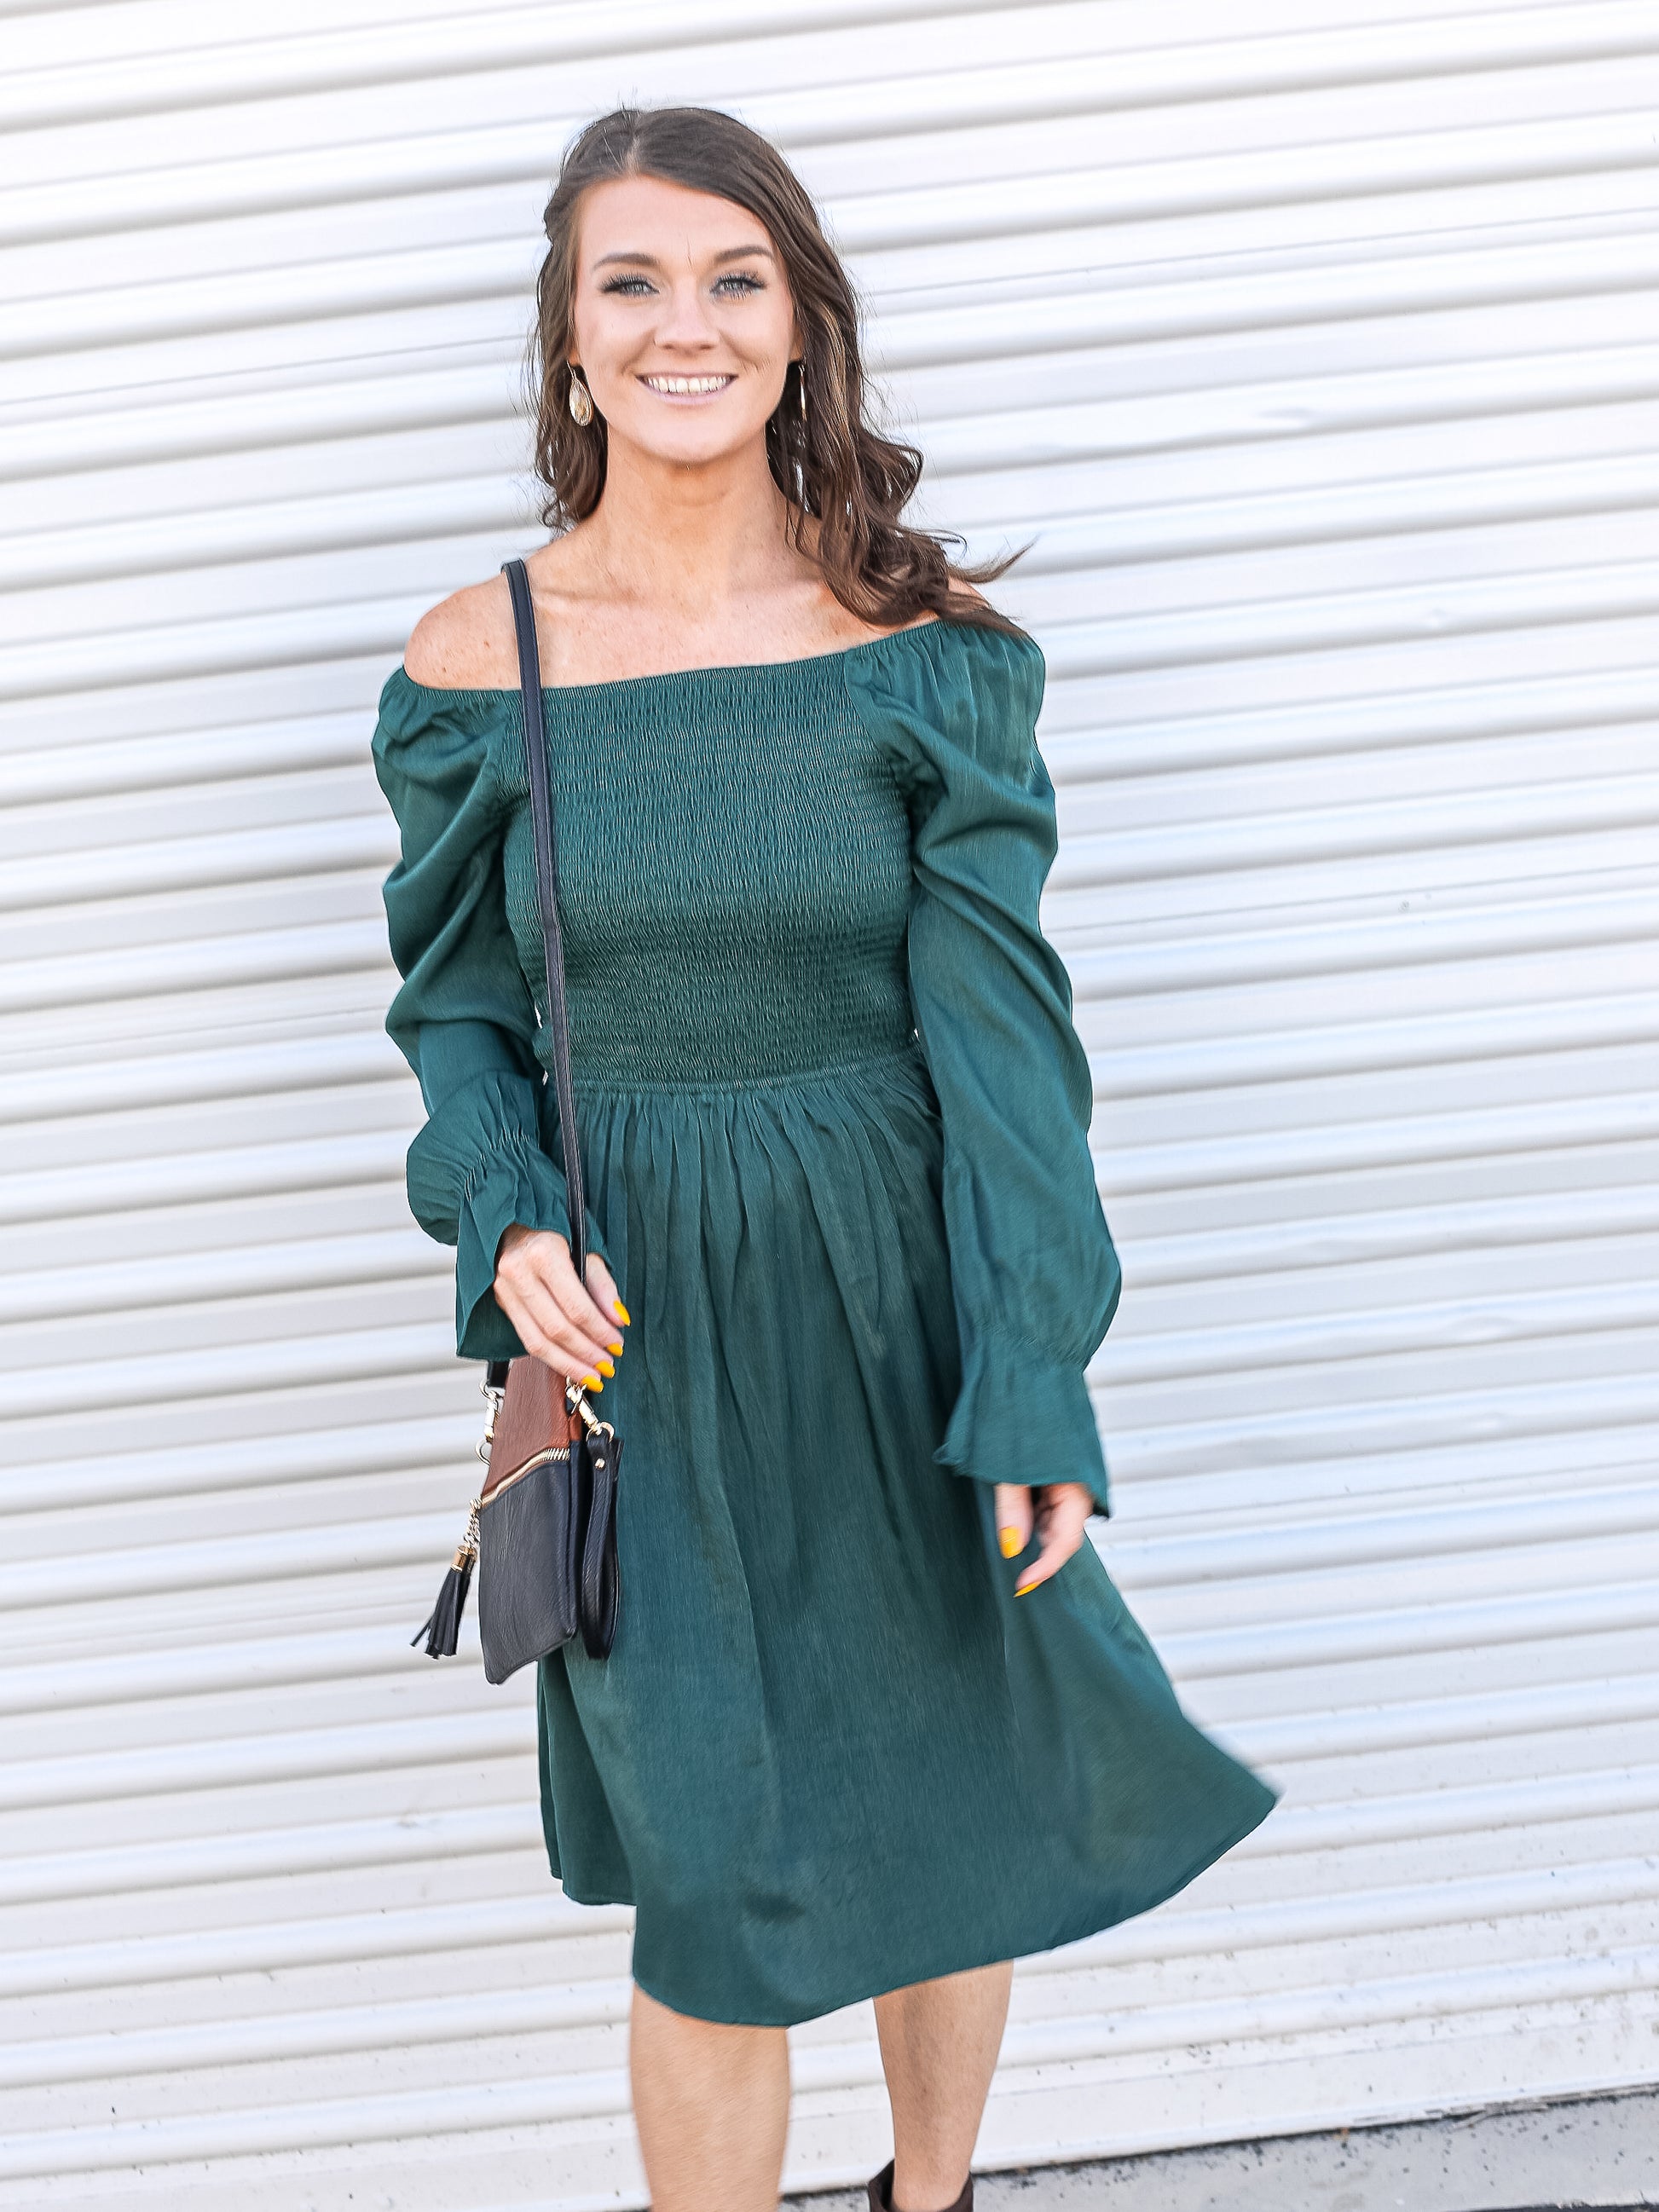 Emerald green dress off the shoulder paired with a classic crossbody purse